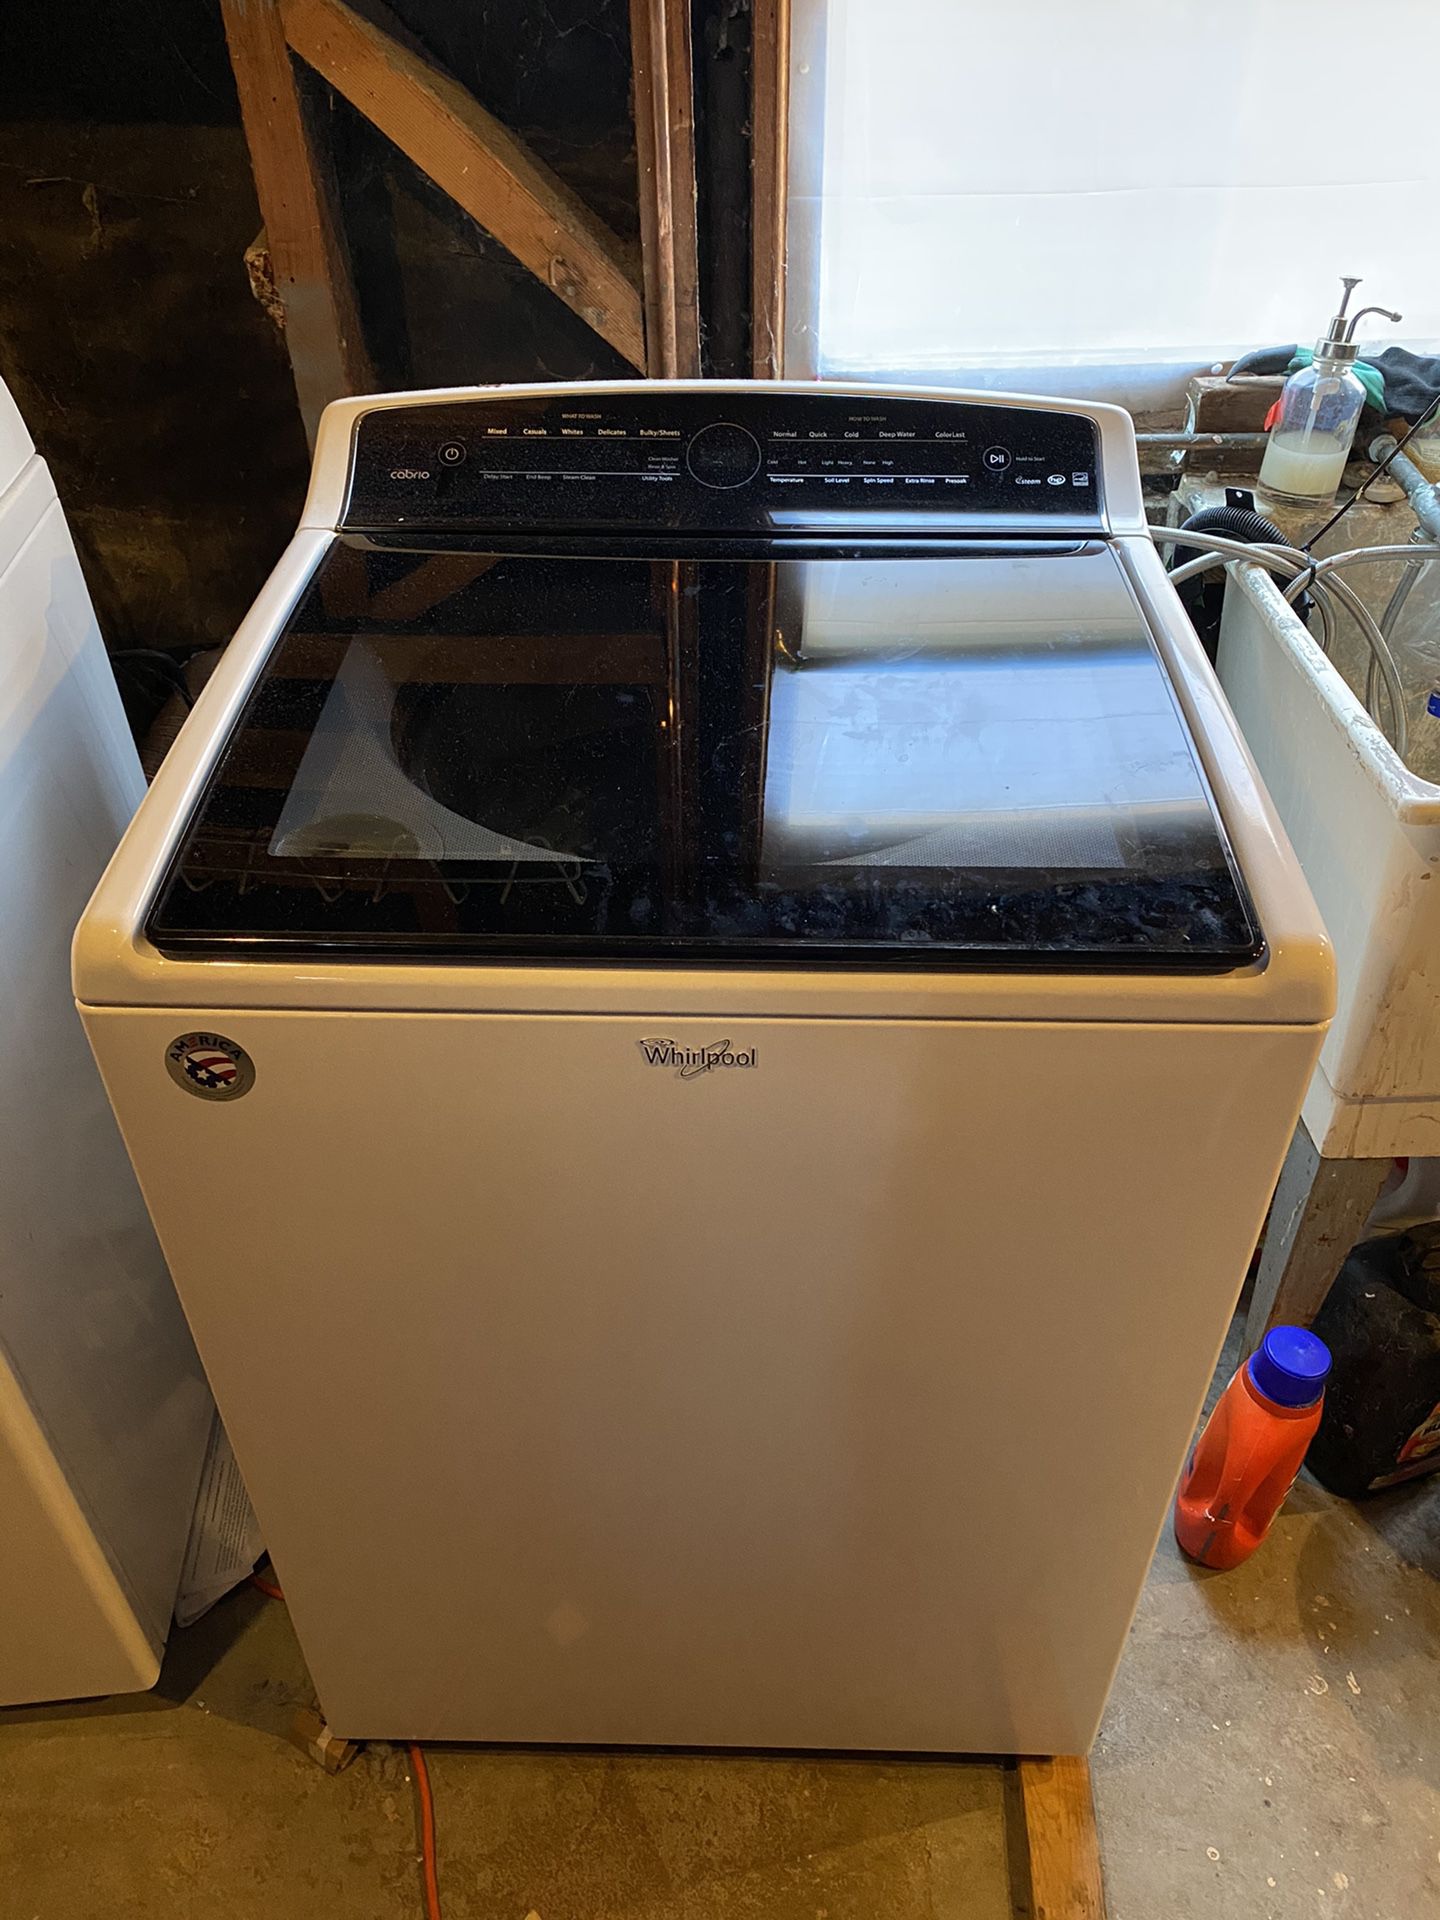 Whirlpool Washer and Dryer (2 years old)